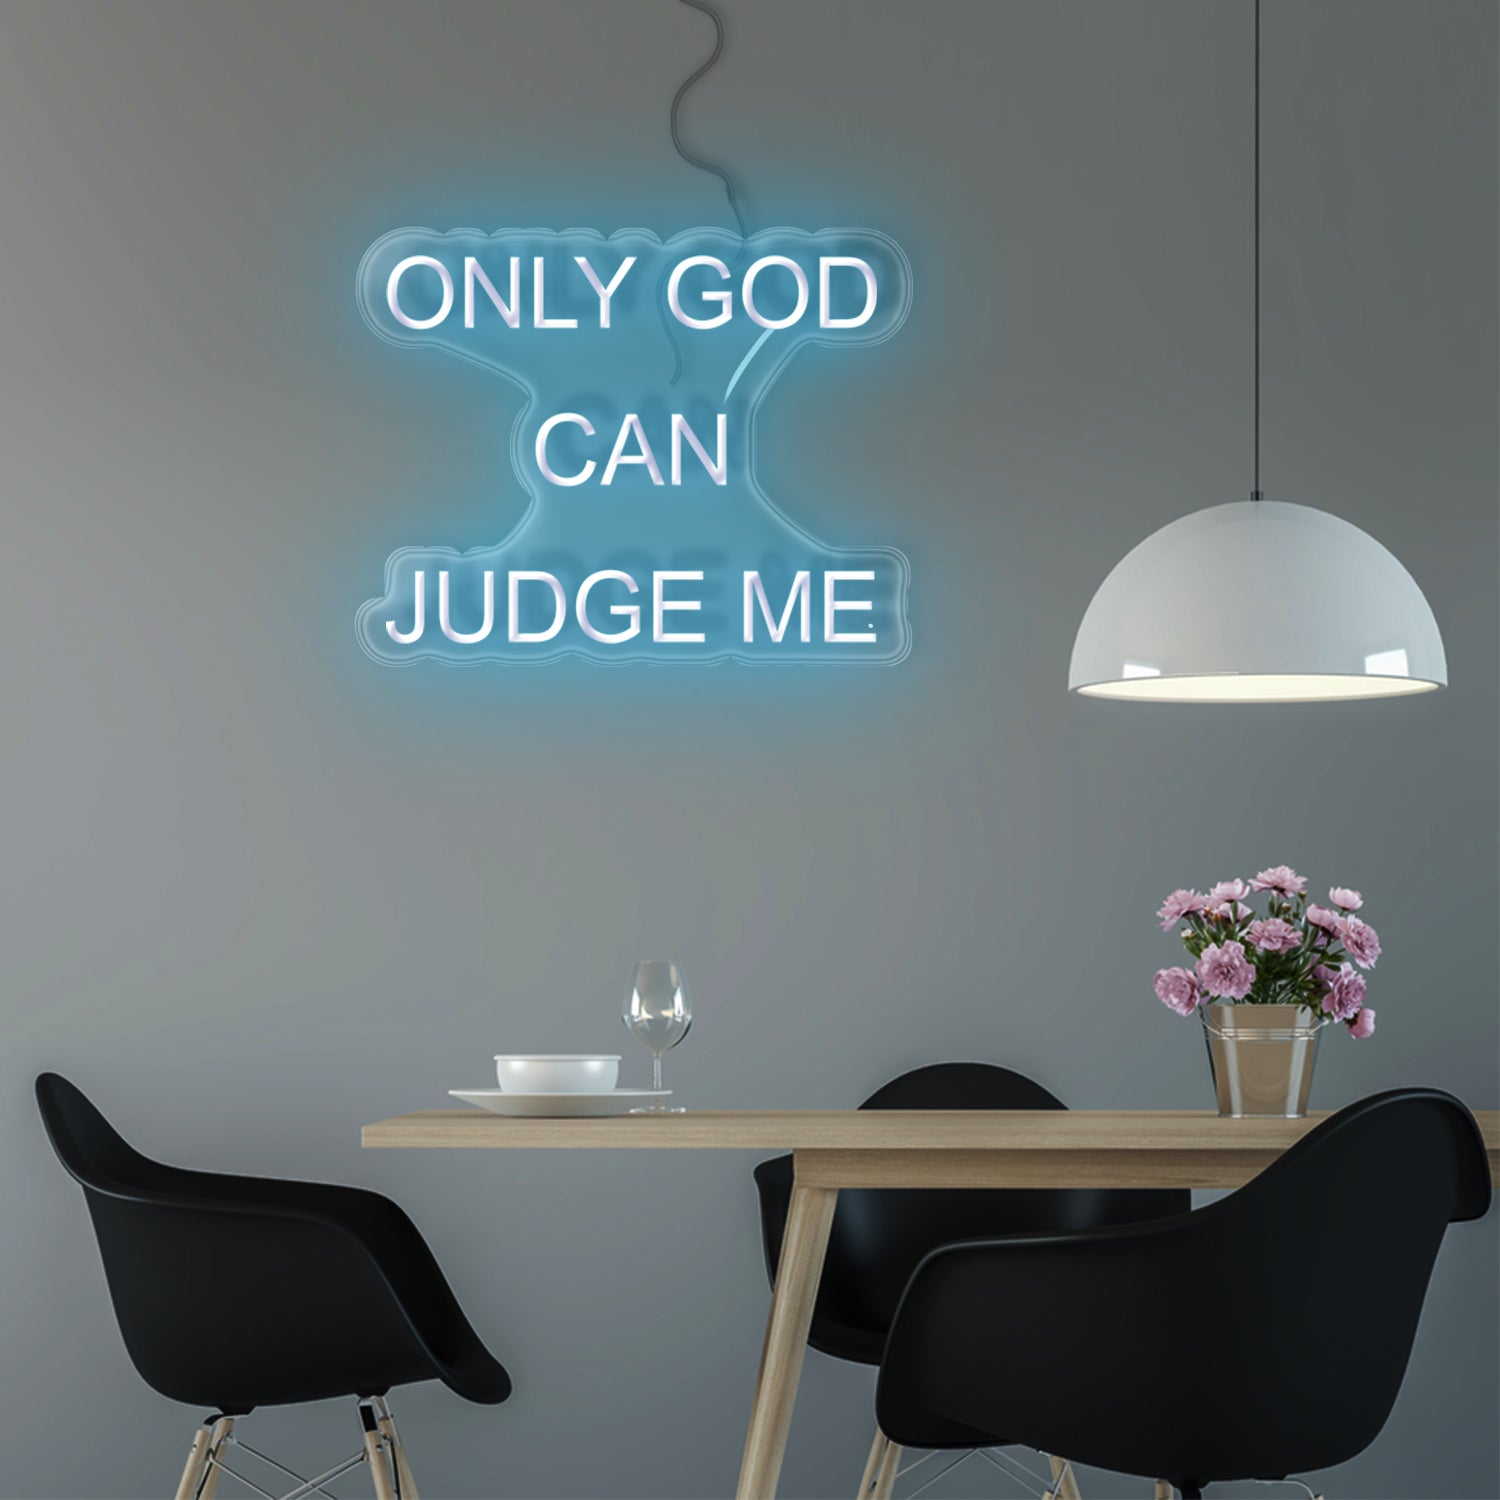 Only God Can Judge Me